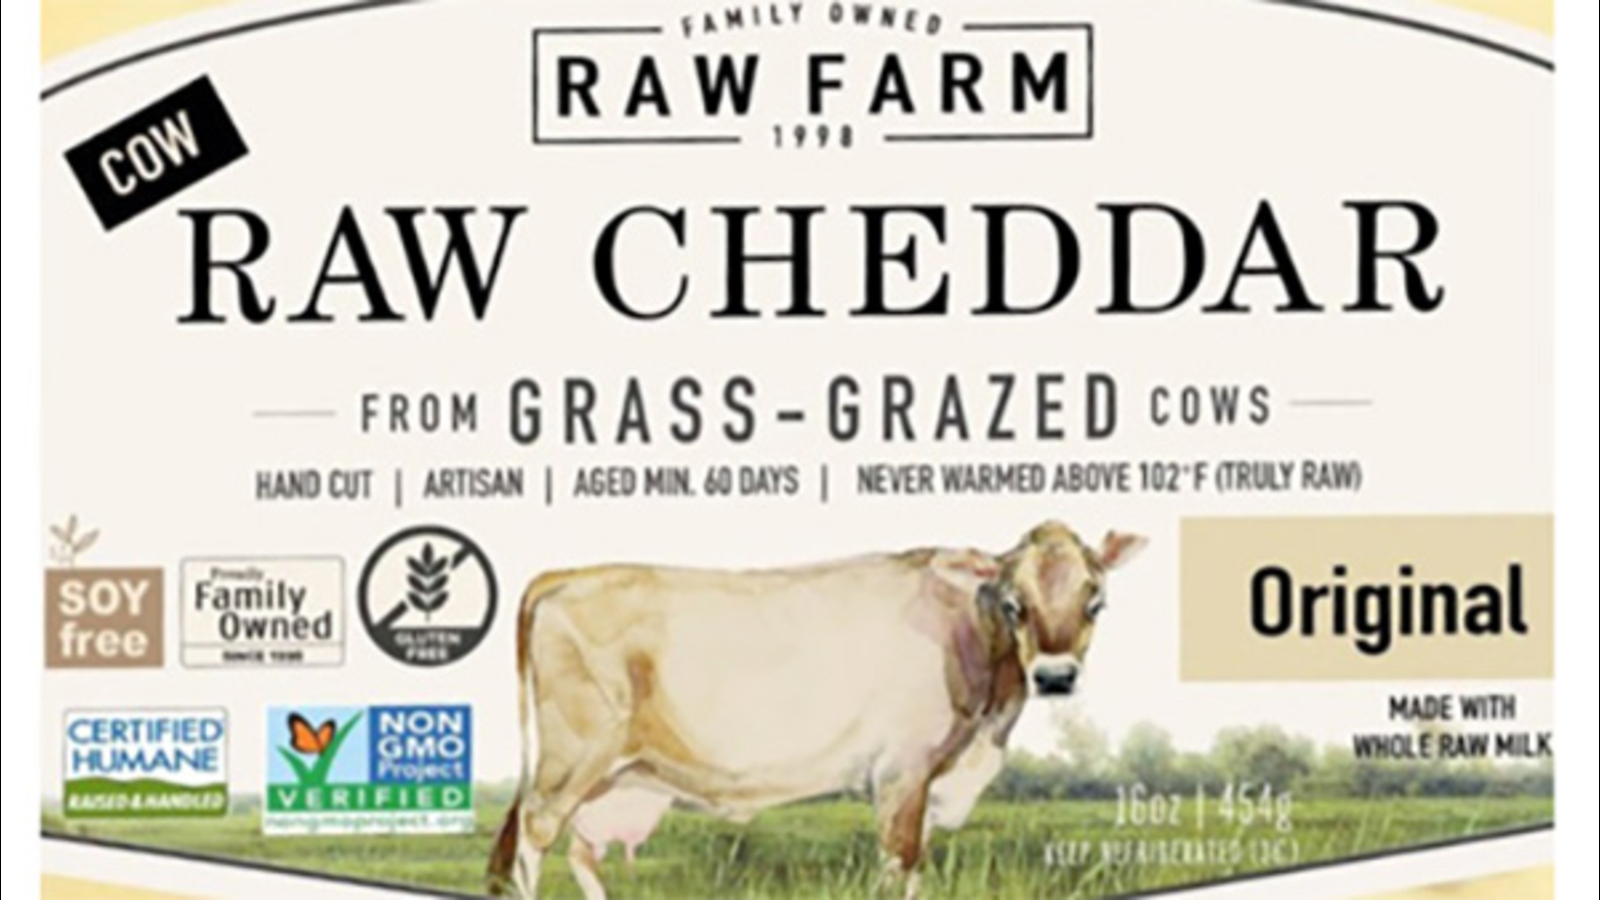 E. coli outbreak that has sickened at least 11 people linked to raw milk cheddar cheese, CDC says [Video]